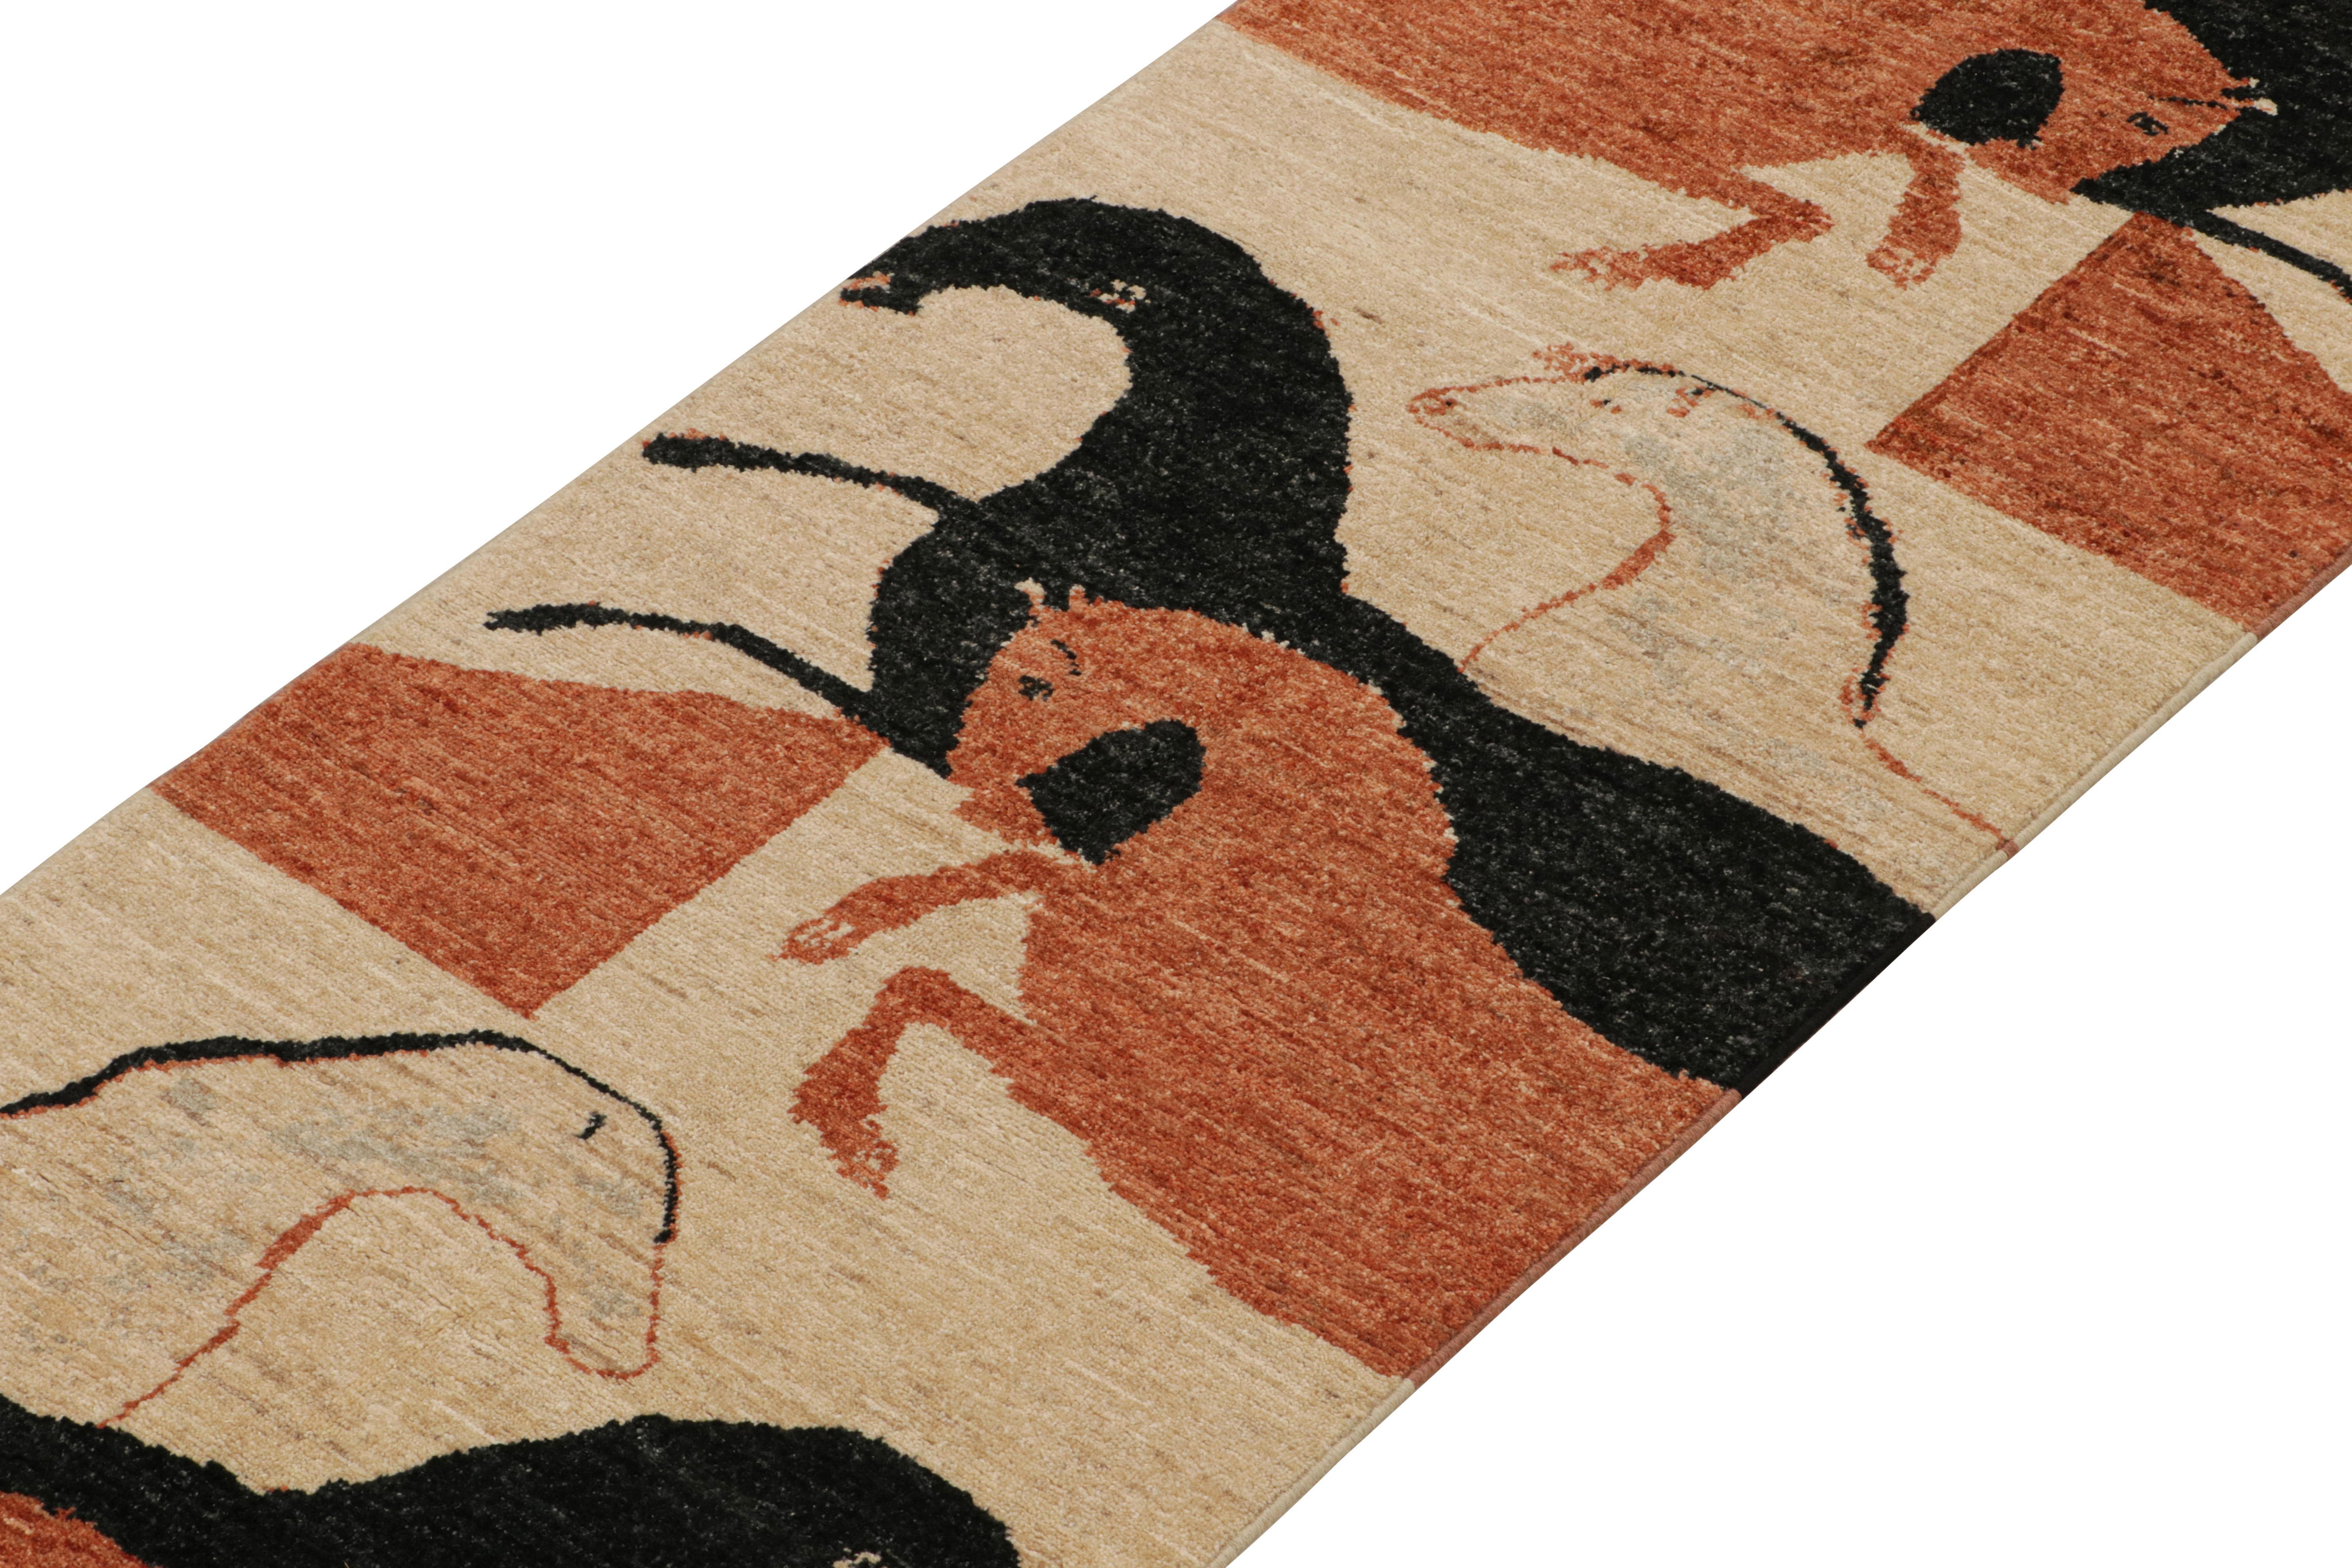 This new addition to Rug & Kilim’s Modern Classics collection is a 3x8 pictorial runner—a contemporary resurrection of one of the most collectible primitivist styles. 

Further on the Design:

Hand-knotted in wool, this piece is inspired by